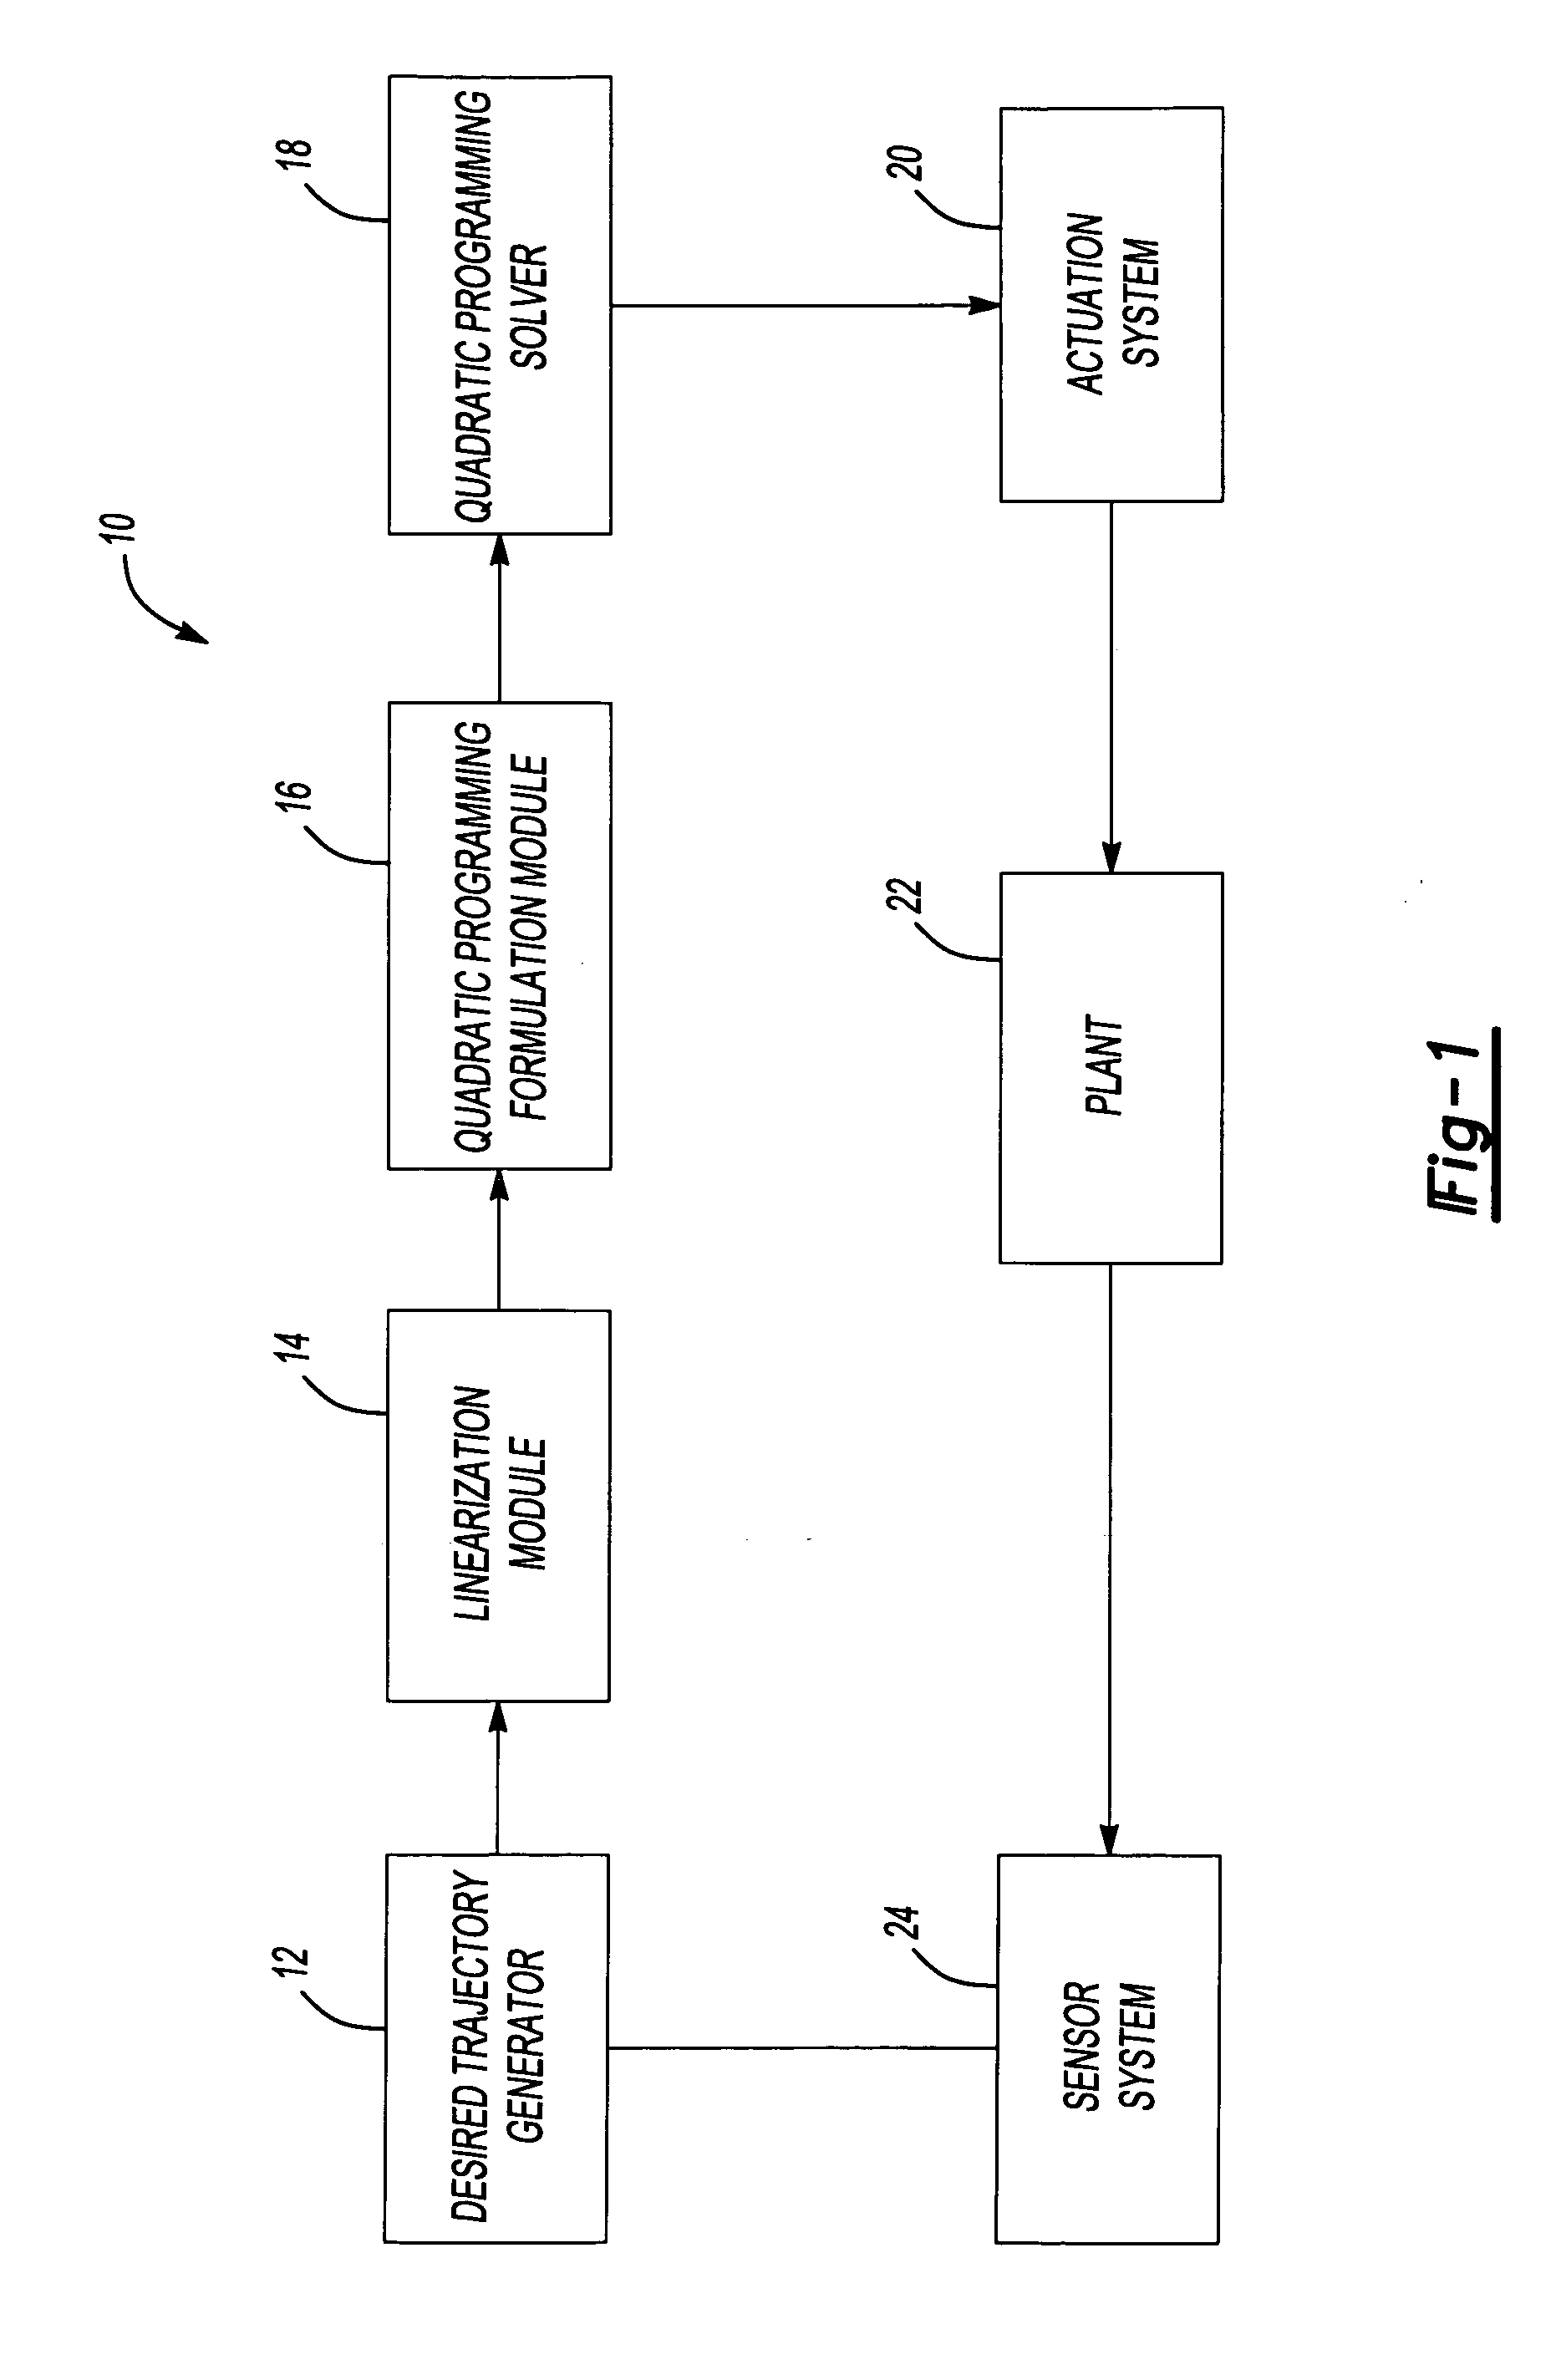 System and method of applying interior point method for online model predictive control of gas turbine engines